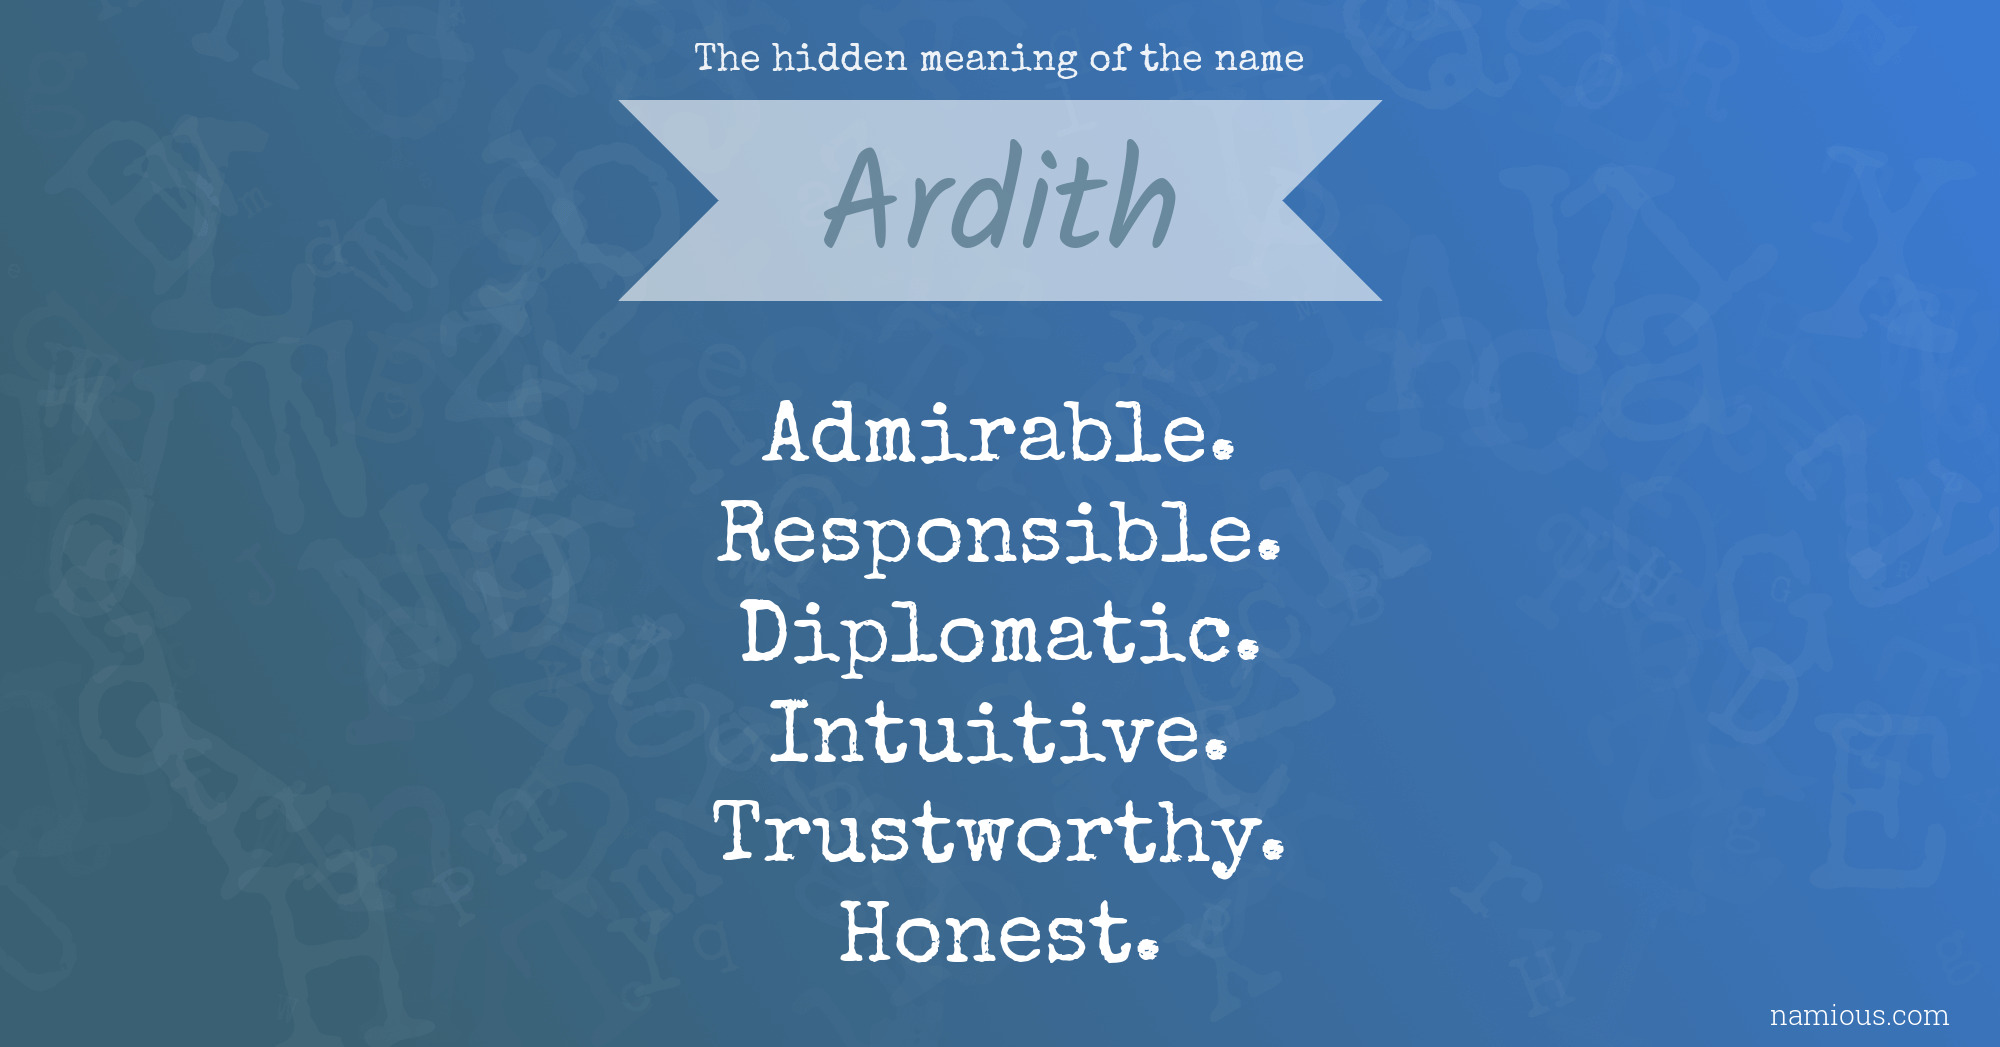 The hidden meaning of the name Ardith